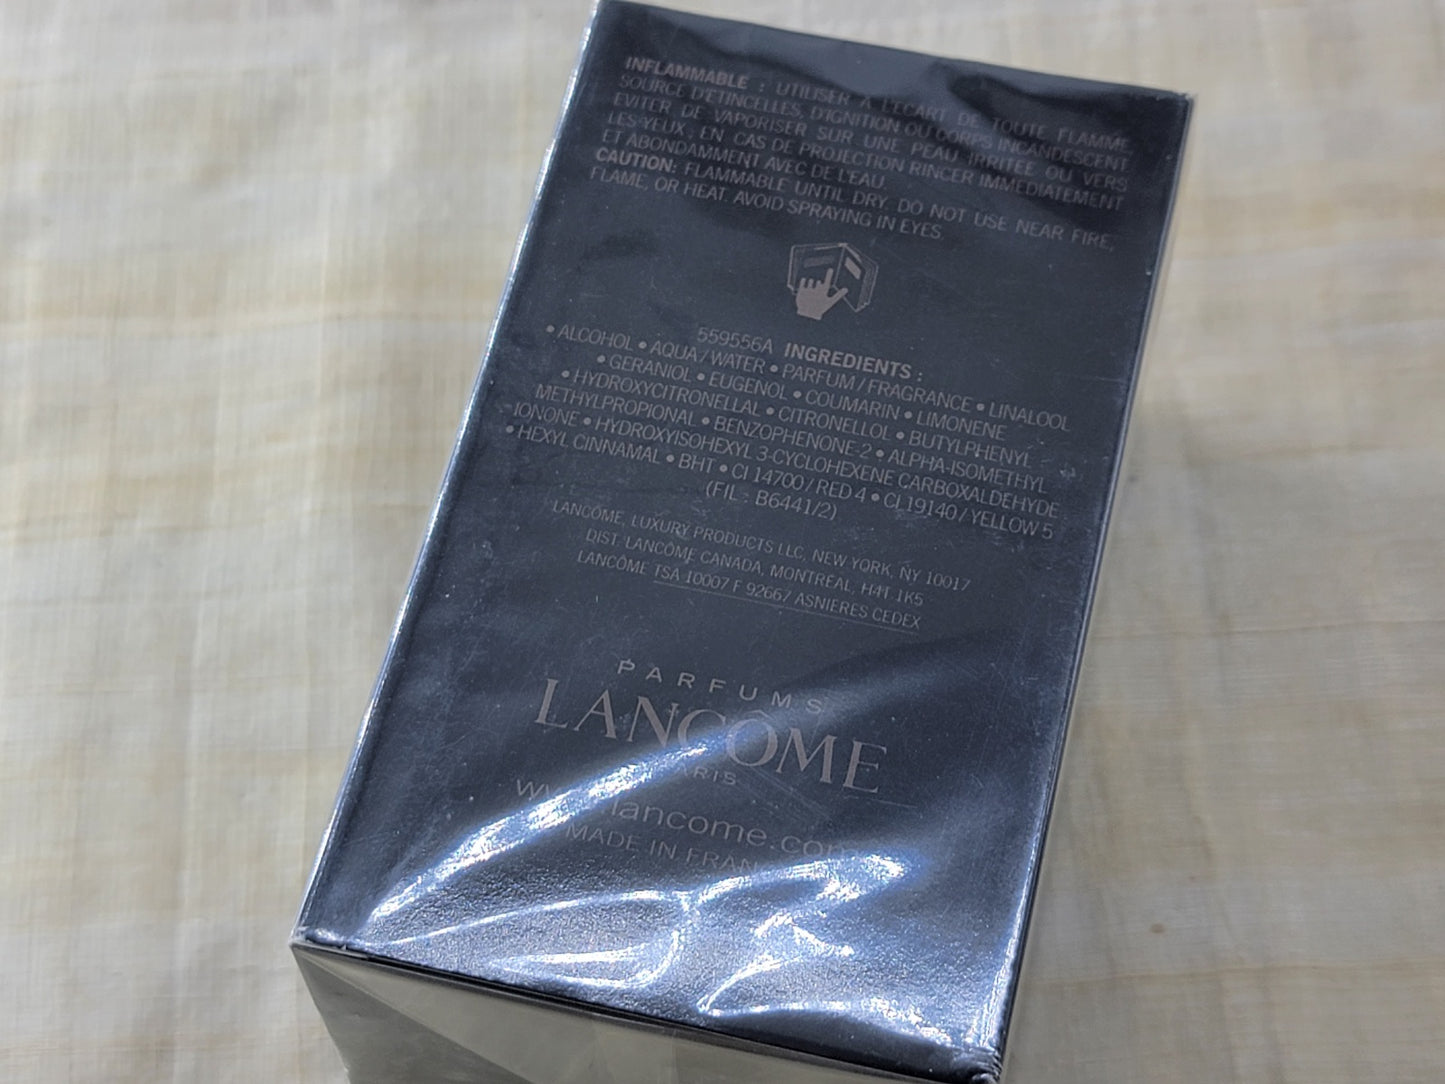 Miracle Homme Lancome EDT Spray 75 ml 2.5 oz OR 50 ml 1.7 oz Or Aftershave 100 ml, Vintage, Rare, Sealed